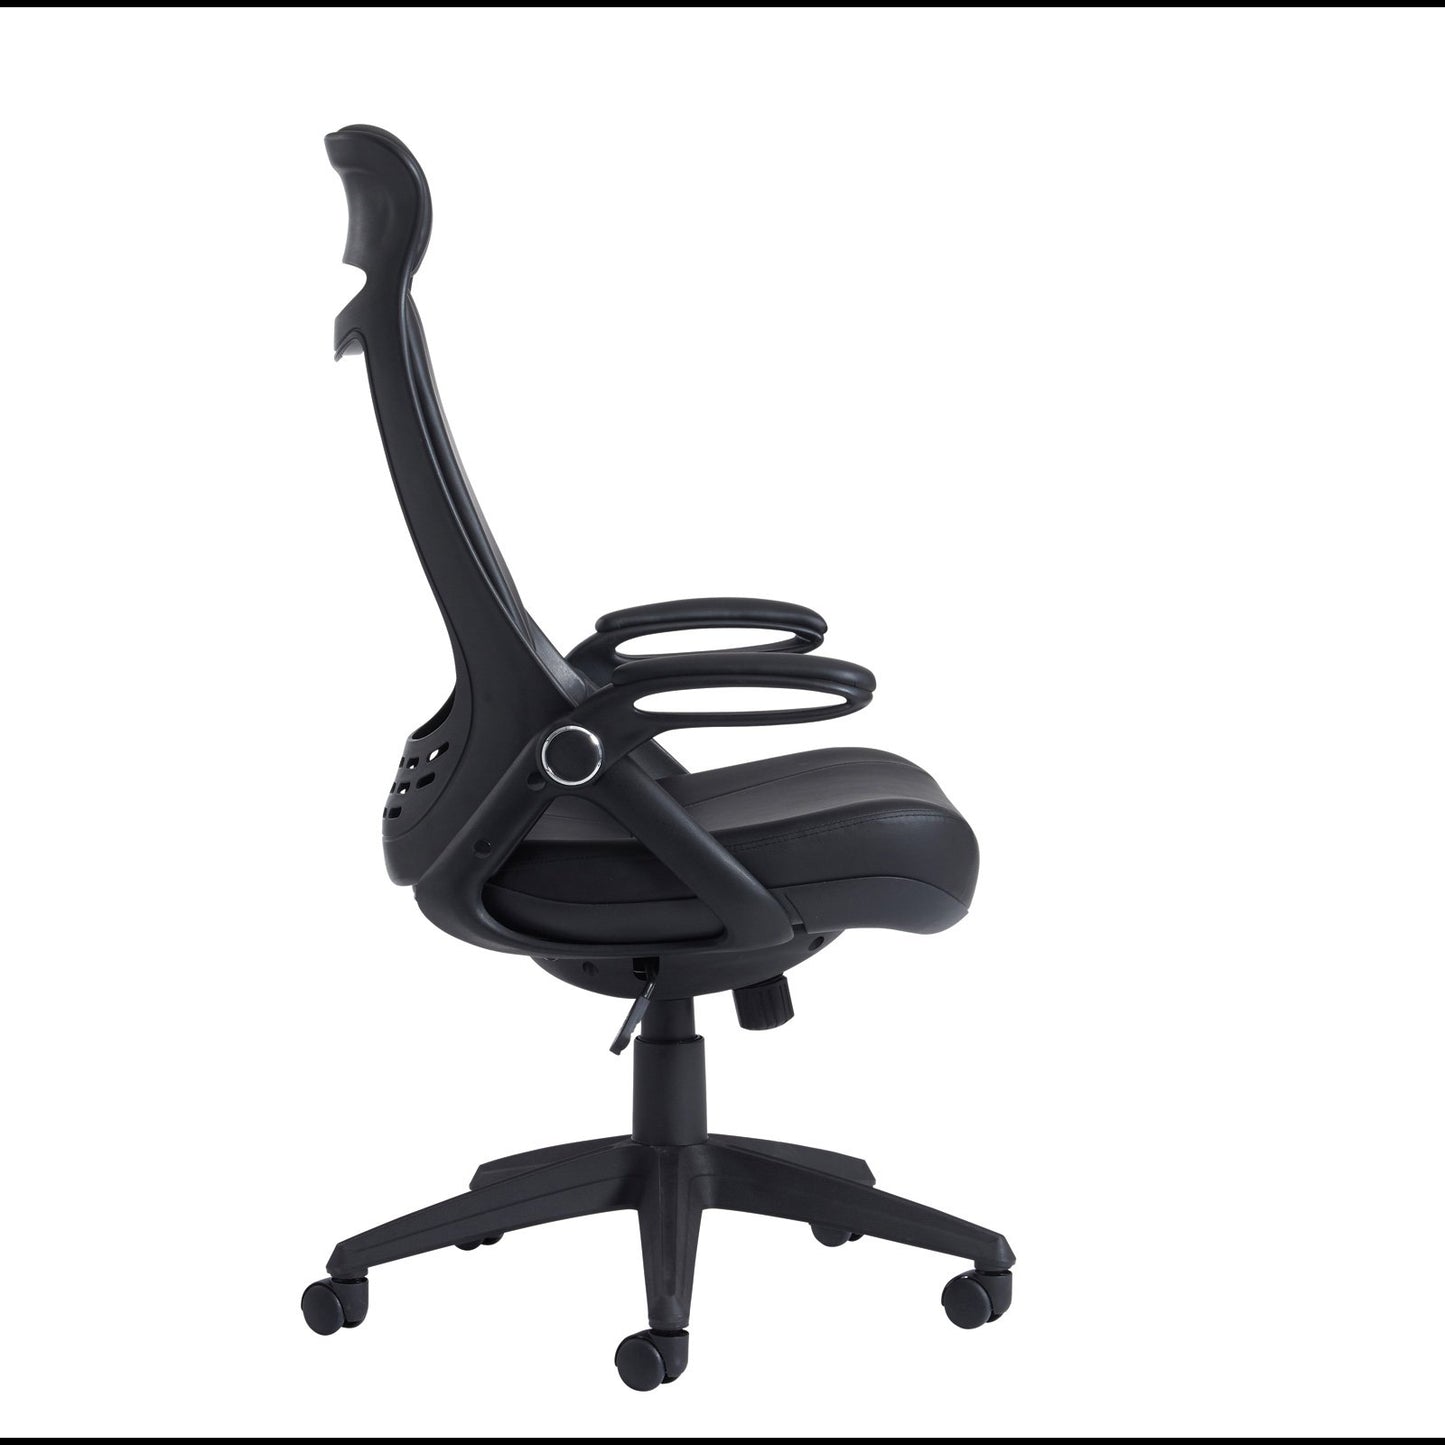 Tuscan managers chair with head support